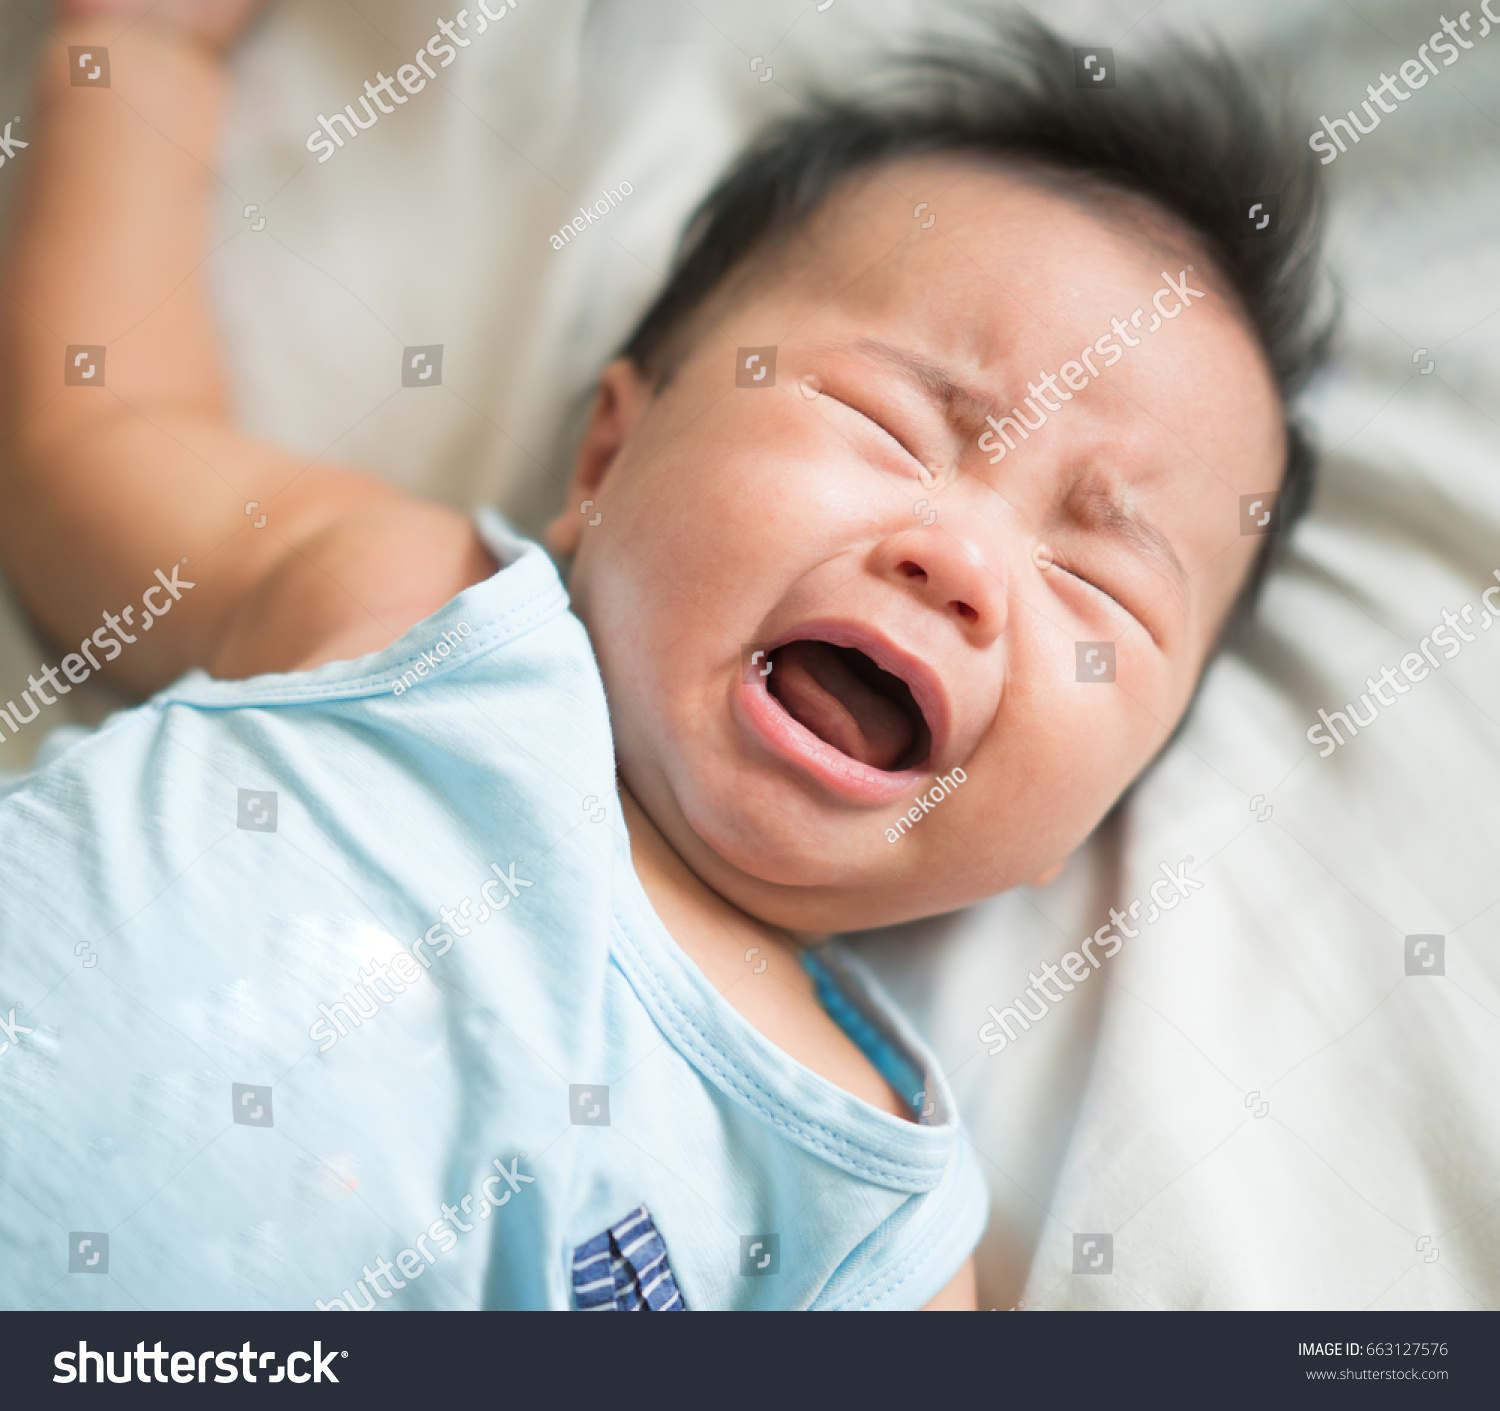 baby hungry cry